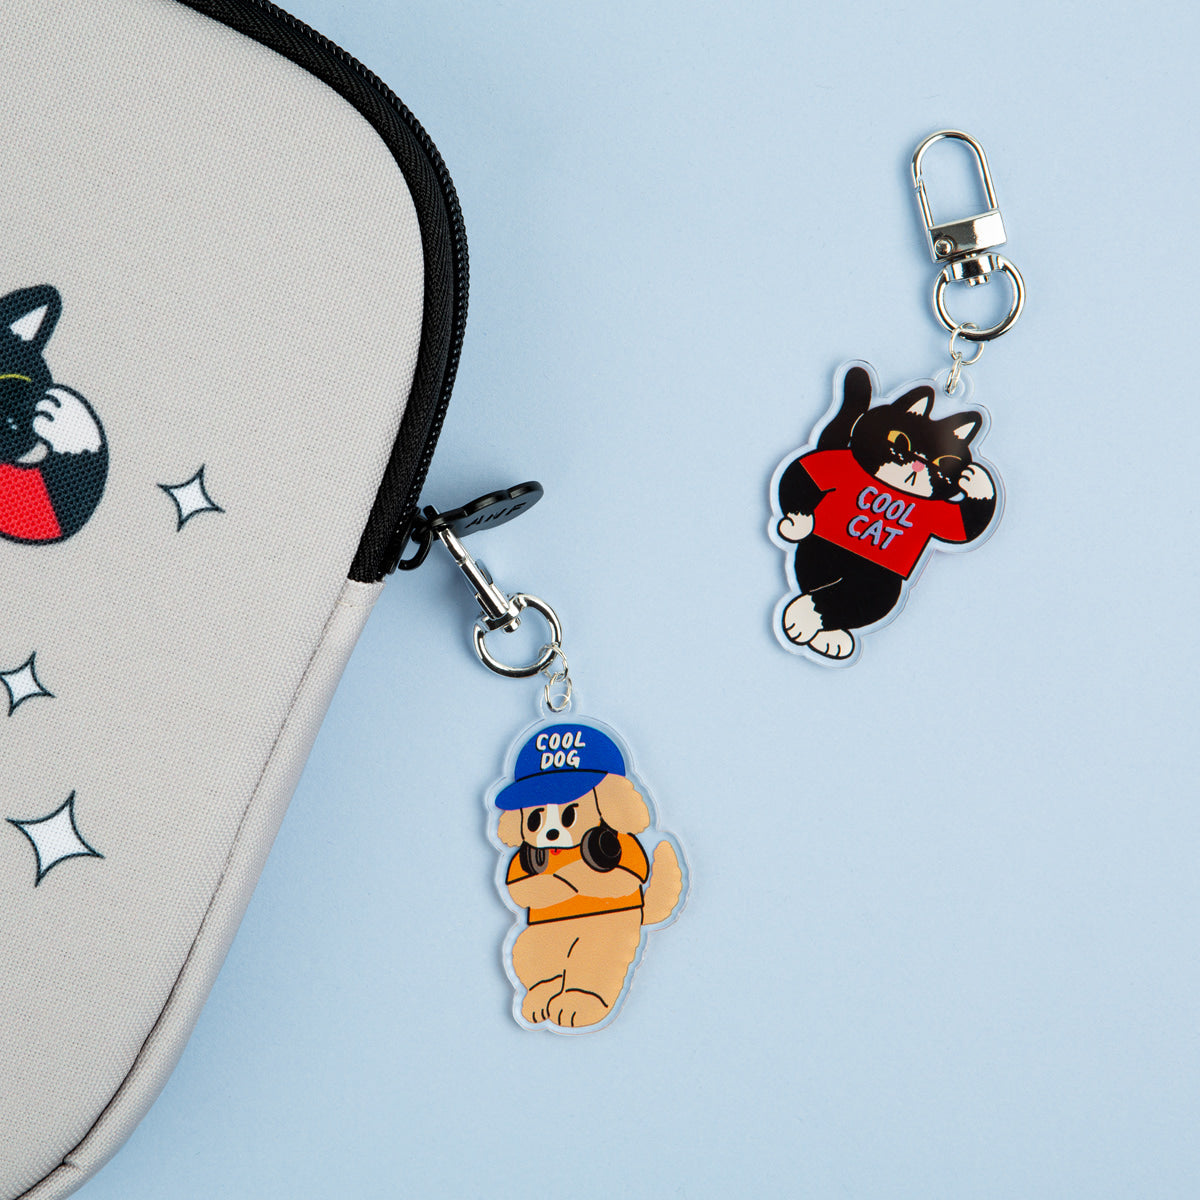 Cool Dog Cat Character Acrylic Keyring for Airpod Buzz Pouch Bag